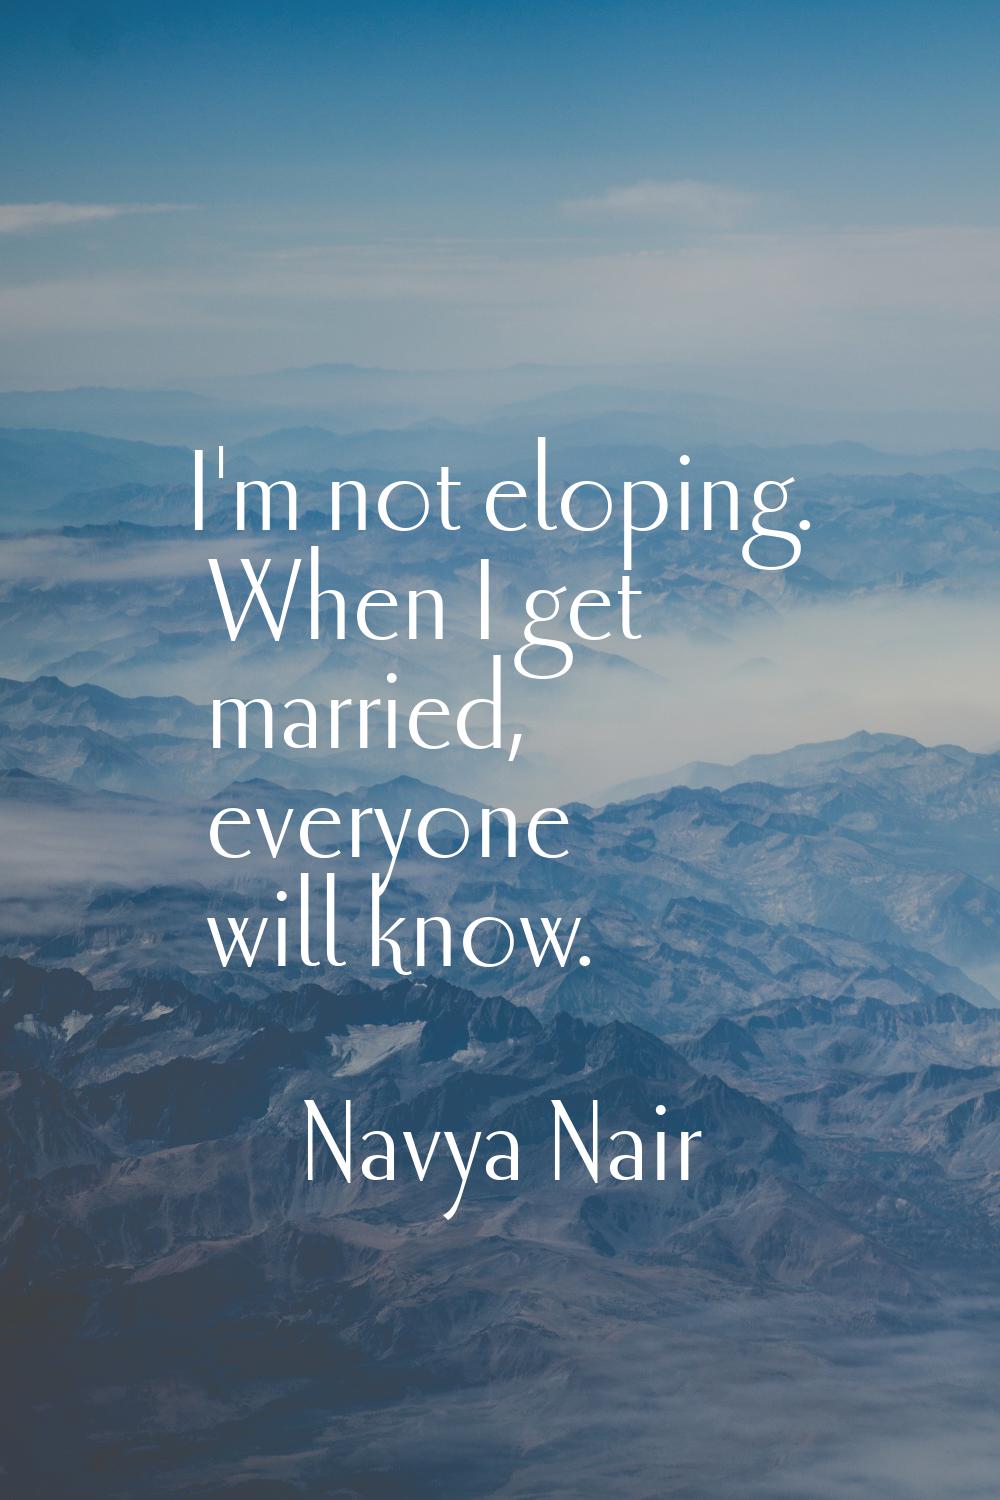 I'm not eloping. When I get married, everyone will know.